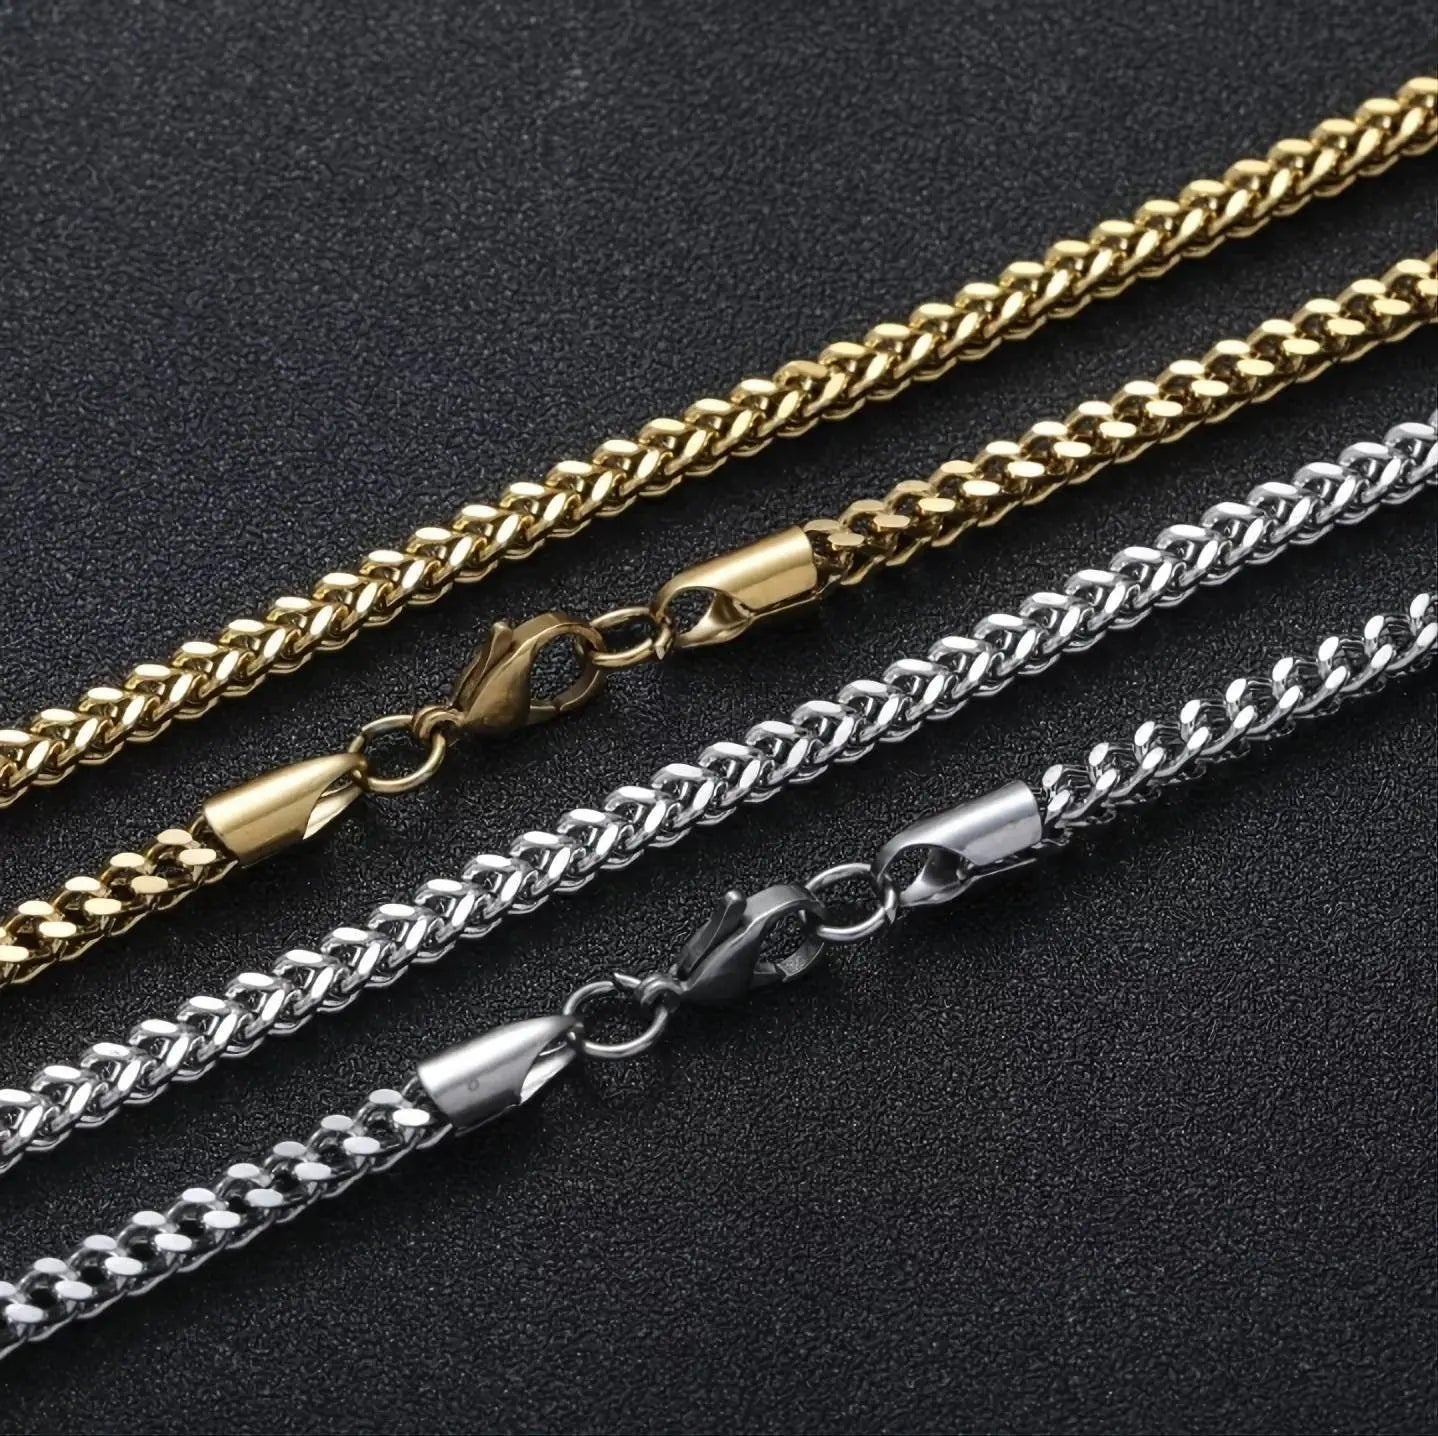 14k Gold Plated 3mm Franco Chain Necklace Stainless Steel, Franco Necklace for Men,  Mens Gift, Husband, Stainless Steel Necklace JettsJewelers